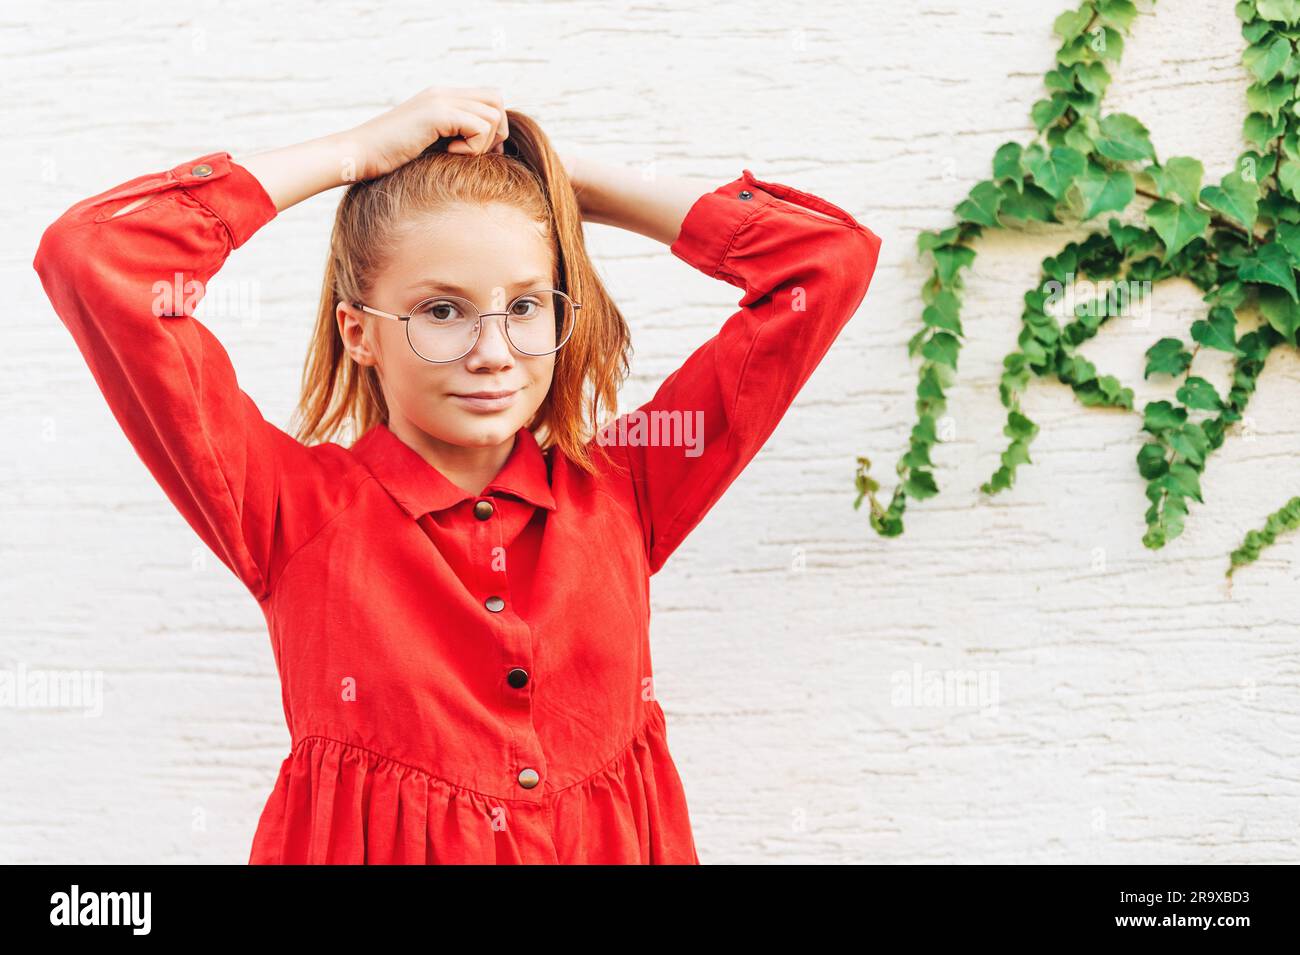 Outdoor portrait of cute preteen girl wearing red dress and eyeglasses, holding hair tail Stock Photo